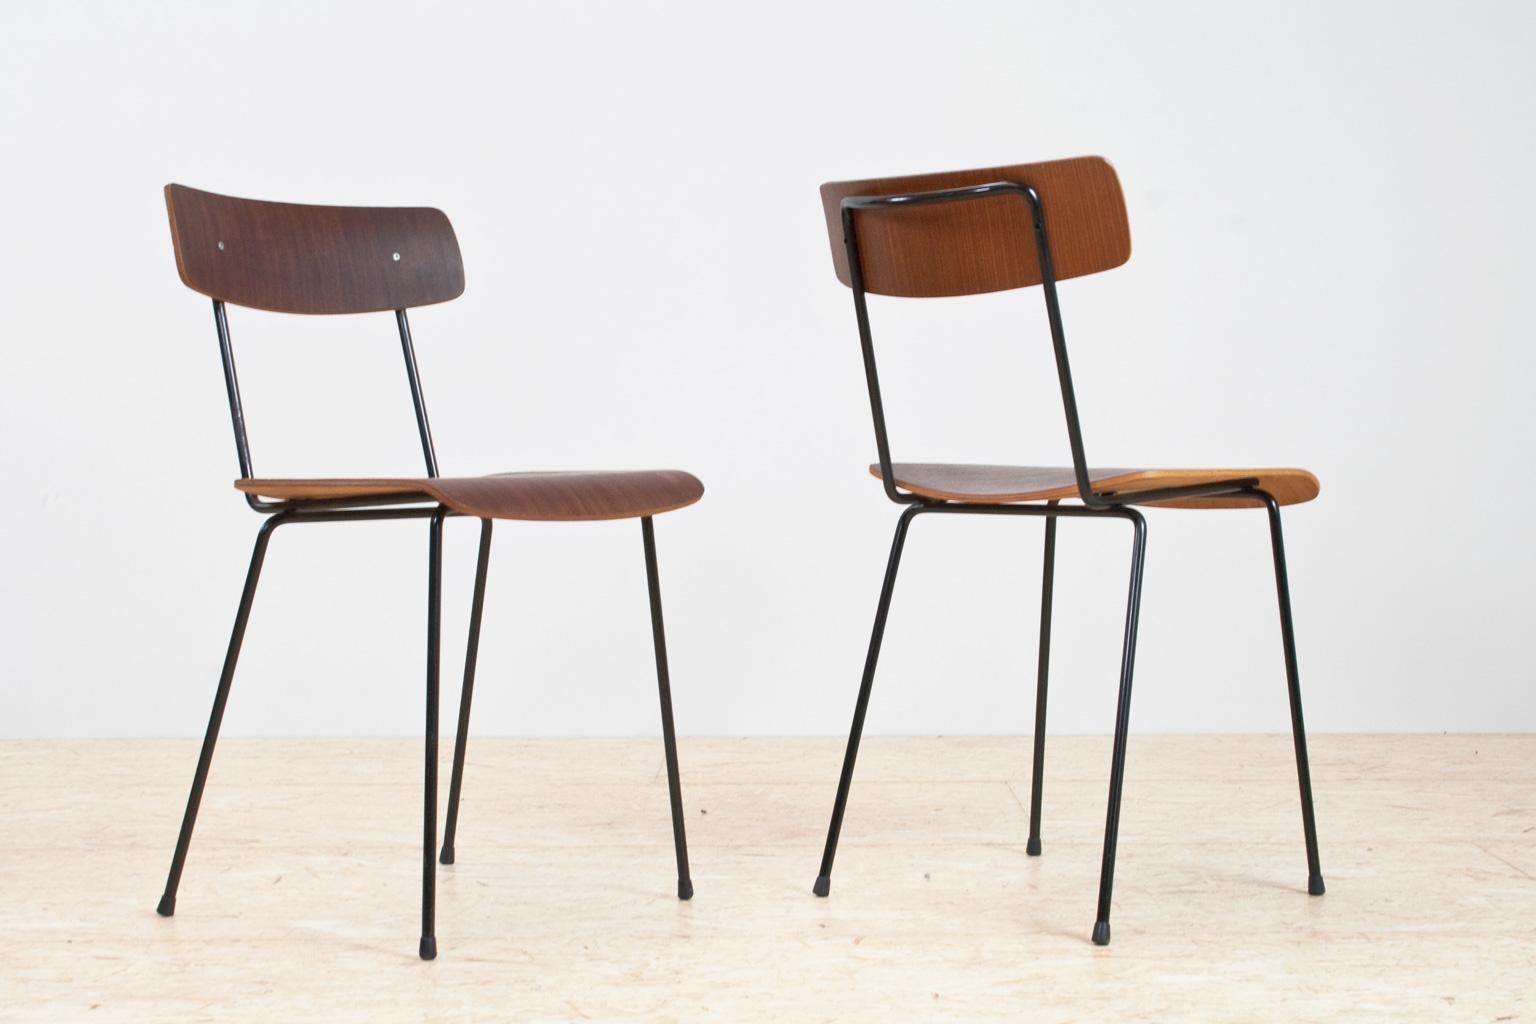 Minimalist and Mid-Century Modern pair of A.Cordemeyer chairs in brown plywood and black metal. Designed in 1959 for Dutch Industrial manufacture Gispen. These elegant and Minimalist dining room pieces with 'high socks' floor caps are rare to find.